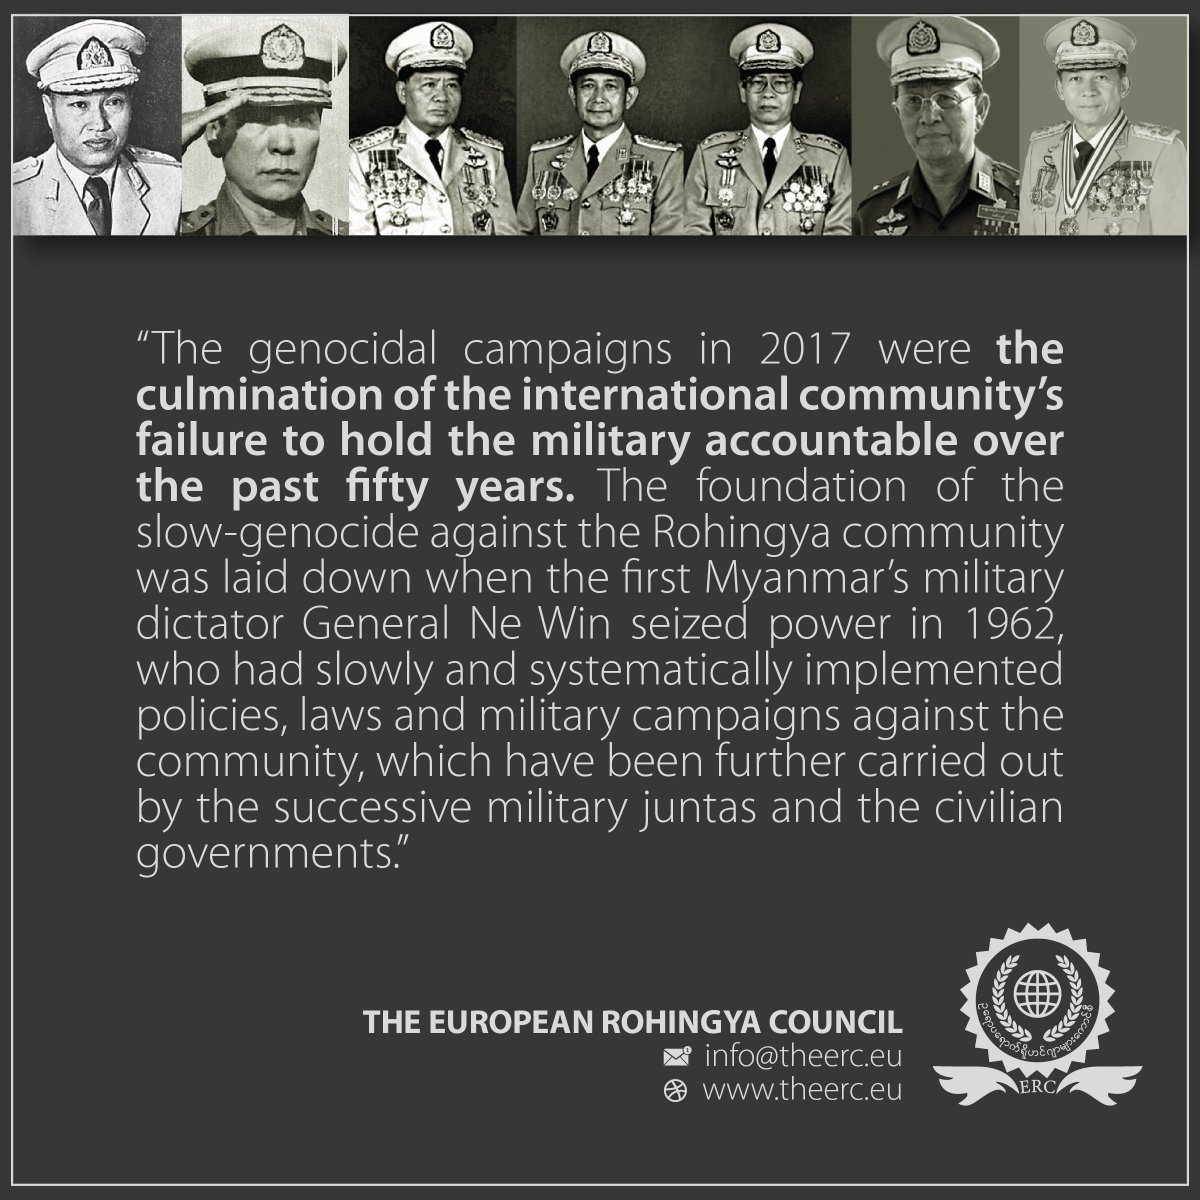 “The genocidal campaigns in 2017 were the culmination of the international community’s failure to hold the military accountable over the past fifty years.'

#RohingyaGenocideRemembranceDay #Rohingya #Myanmar #MyanmarMilitary #MinAungHlaing